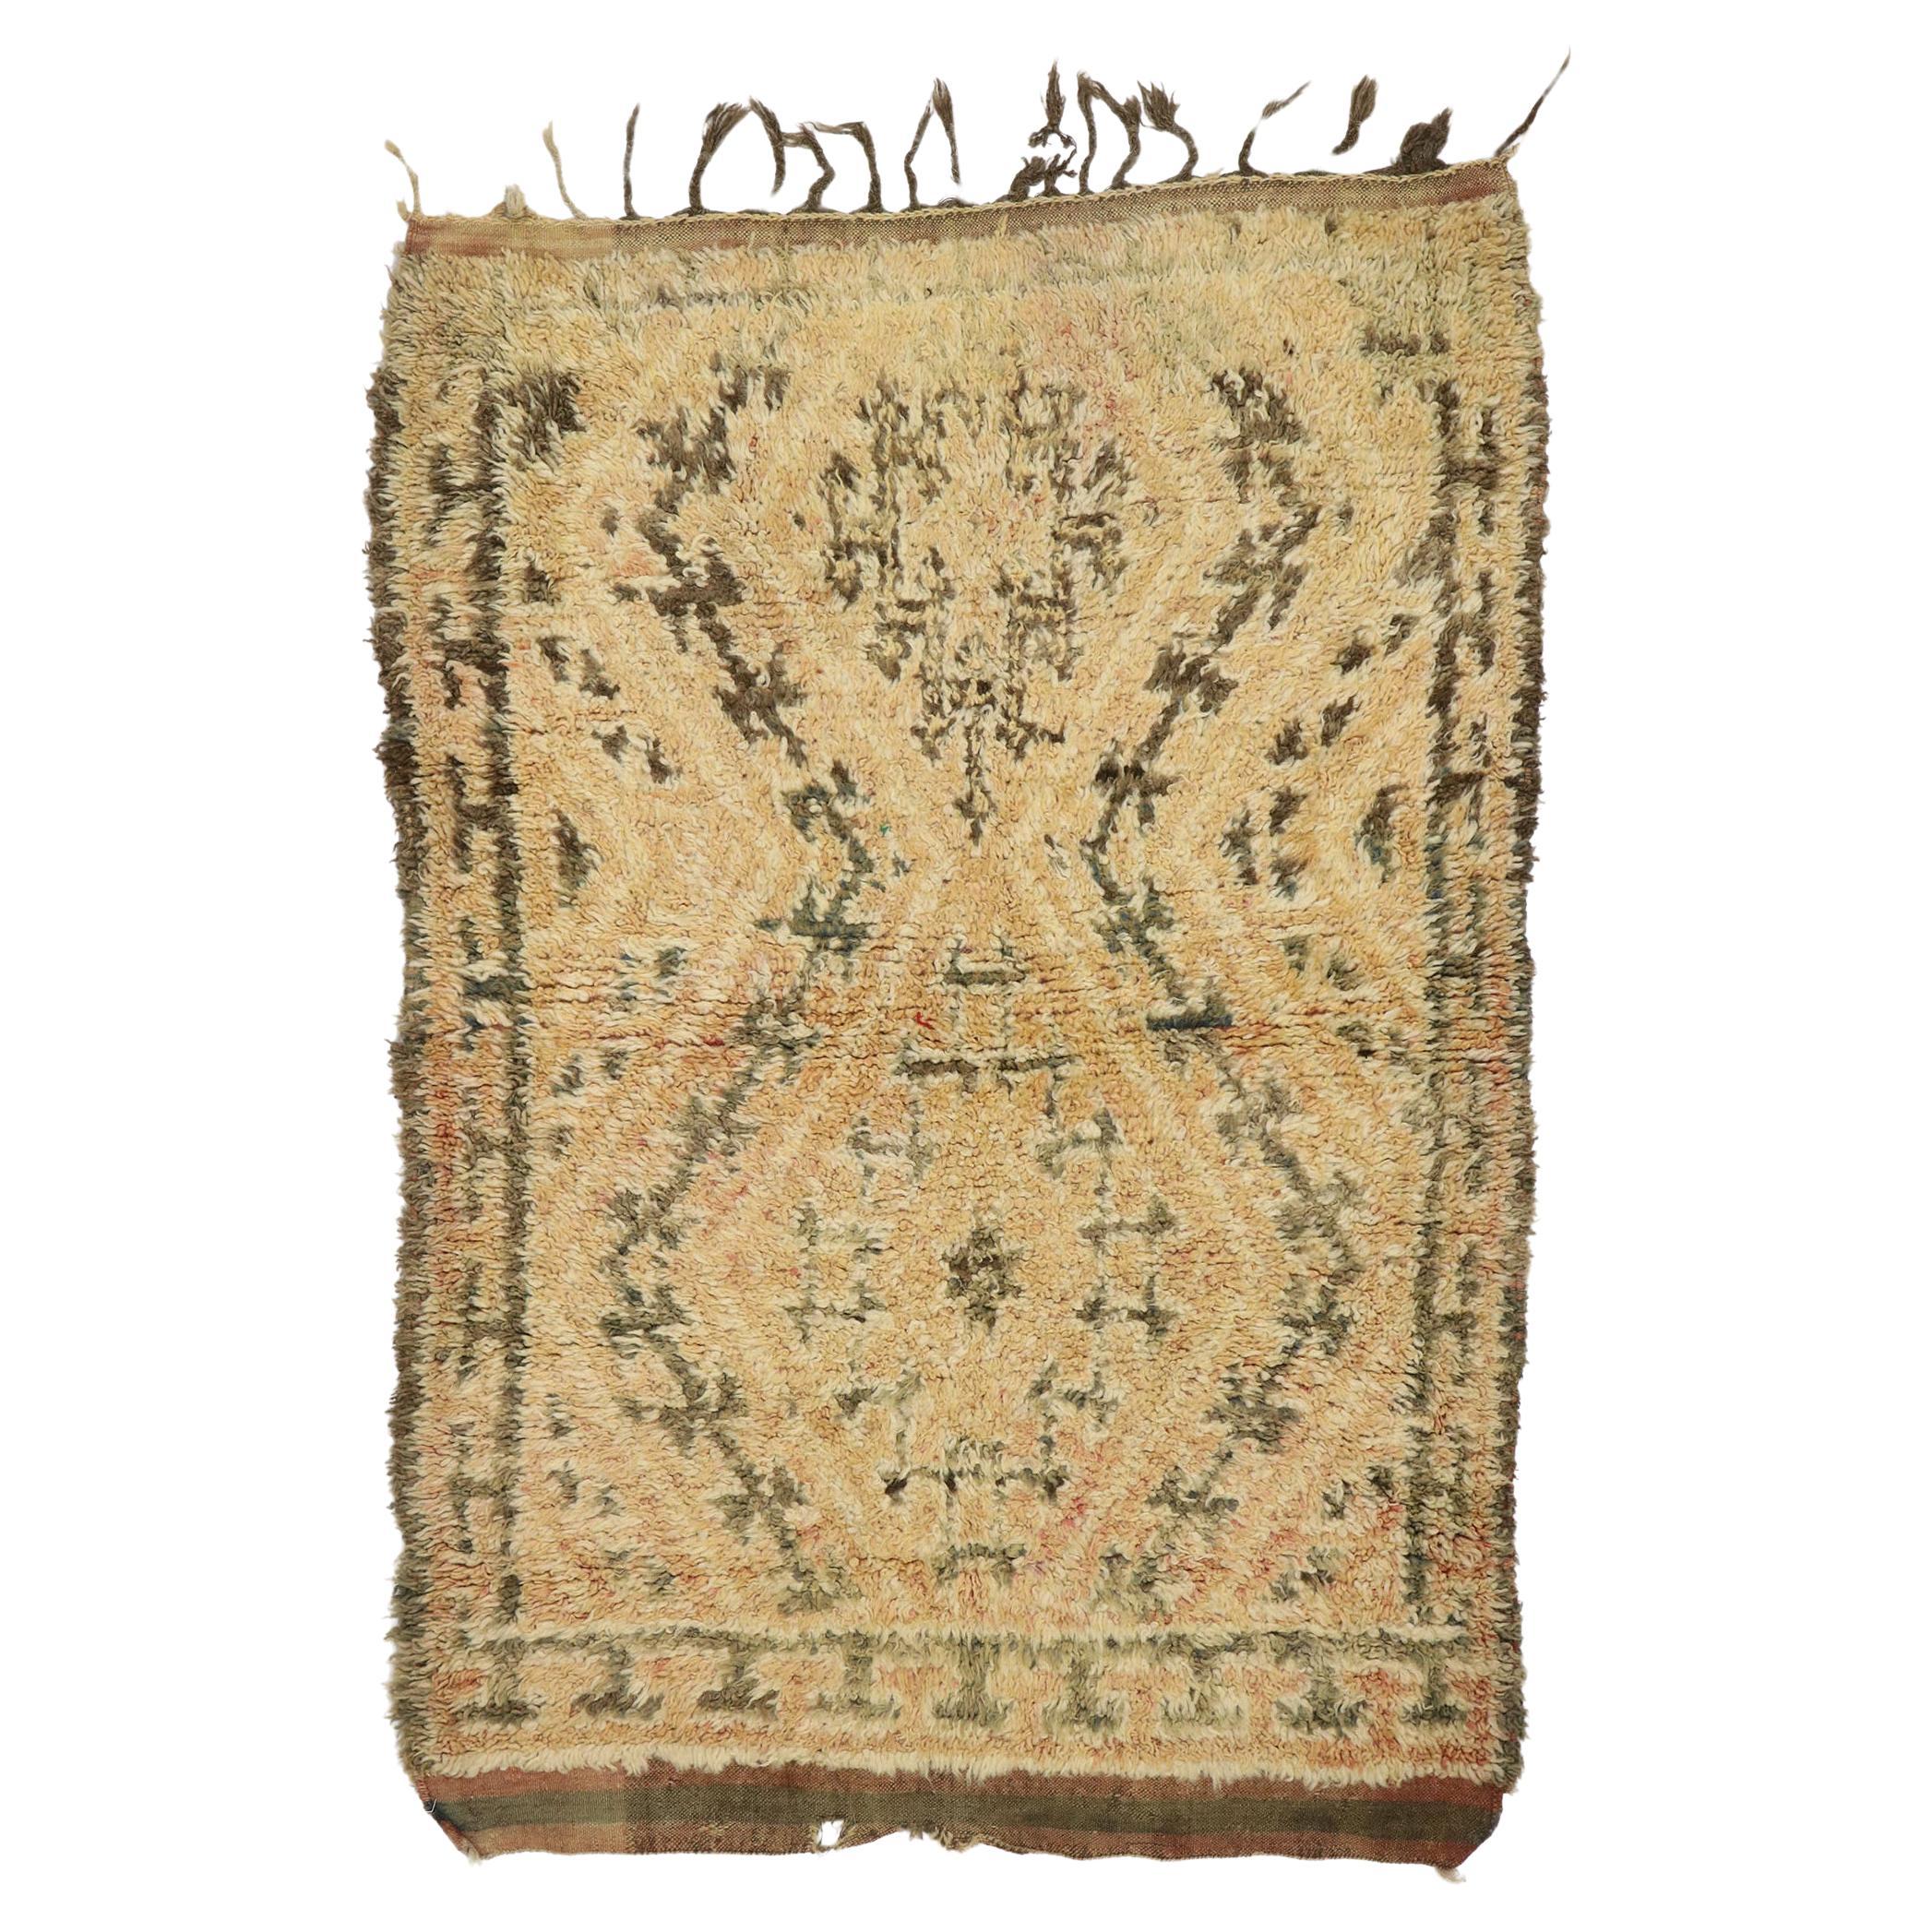 Vintage Berber Moroccan Azilal Rug, Tribal Style Meets Neutral Boho Chic For Sale